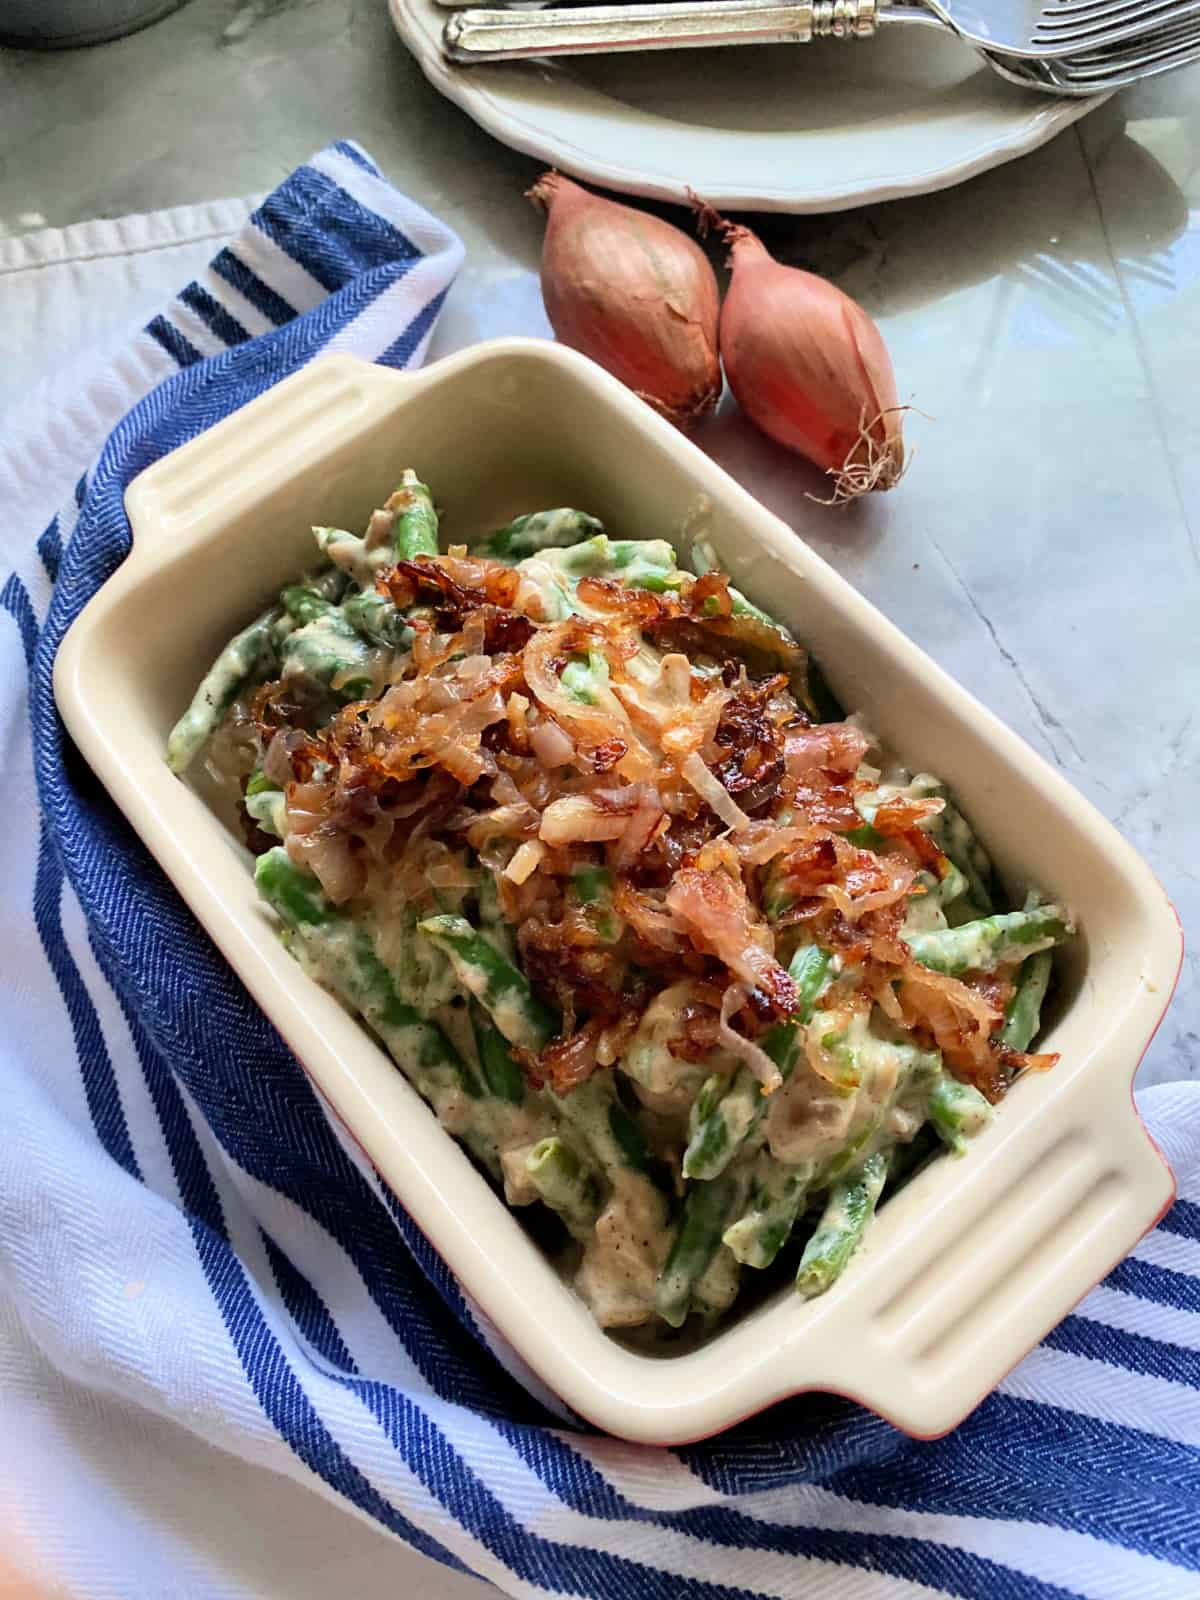 Baking dish with green bean casserole on a blue and white striped cloth with two shallots in the background.